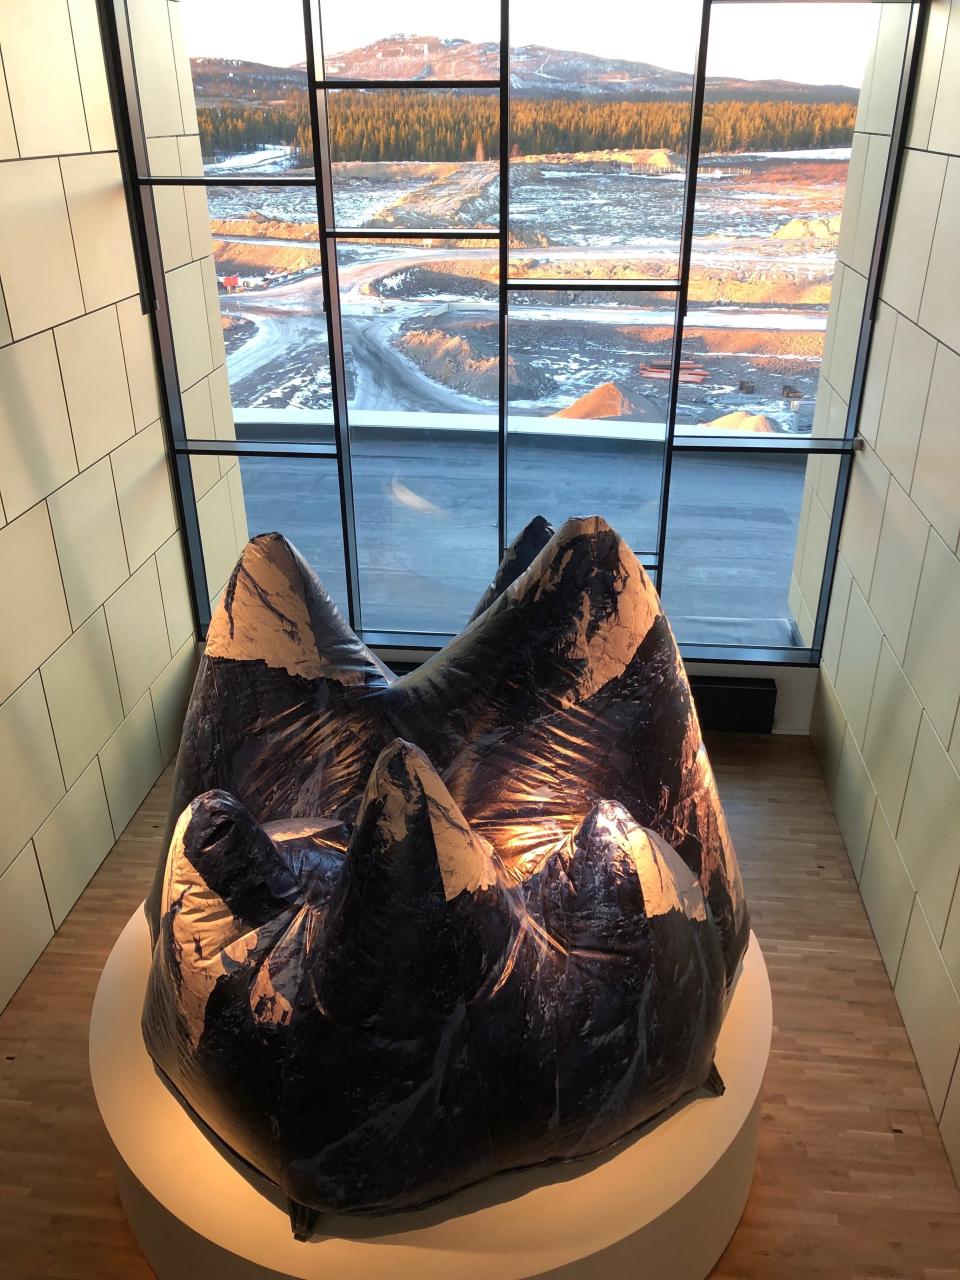 An artwork by Sami artist Carola Grahn in the new City Hall.&nbsp;While she admits it&rsquo;s complicated, some Sami people work for the mine. She believes her people have been colonized and ignored thanks to the ore. (Photo: Laura Paddison/HuffPost)